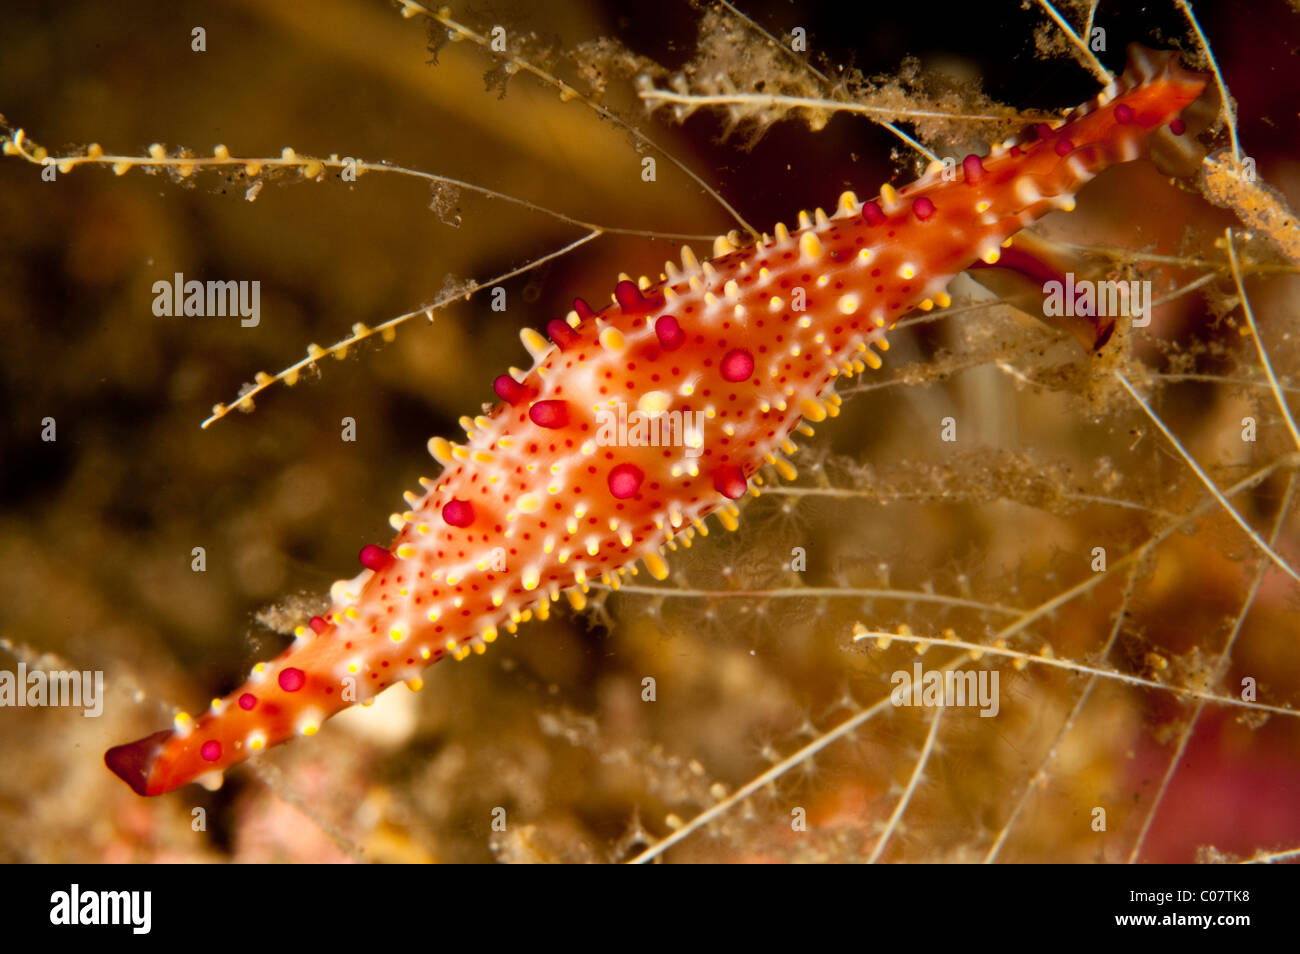 Allied cowrie, Lembeh, Indonesia Stock Photo